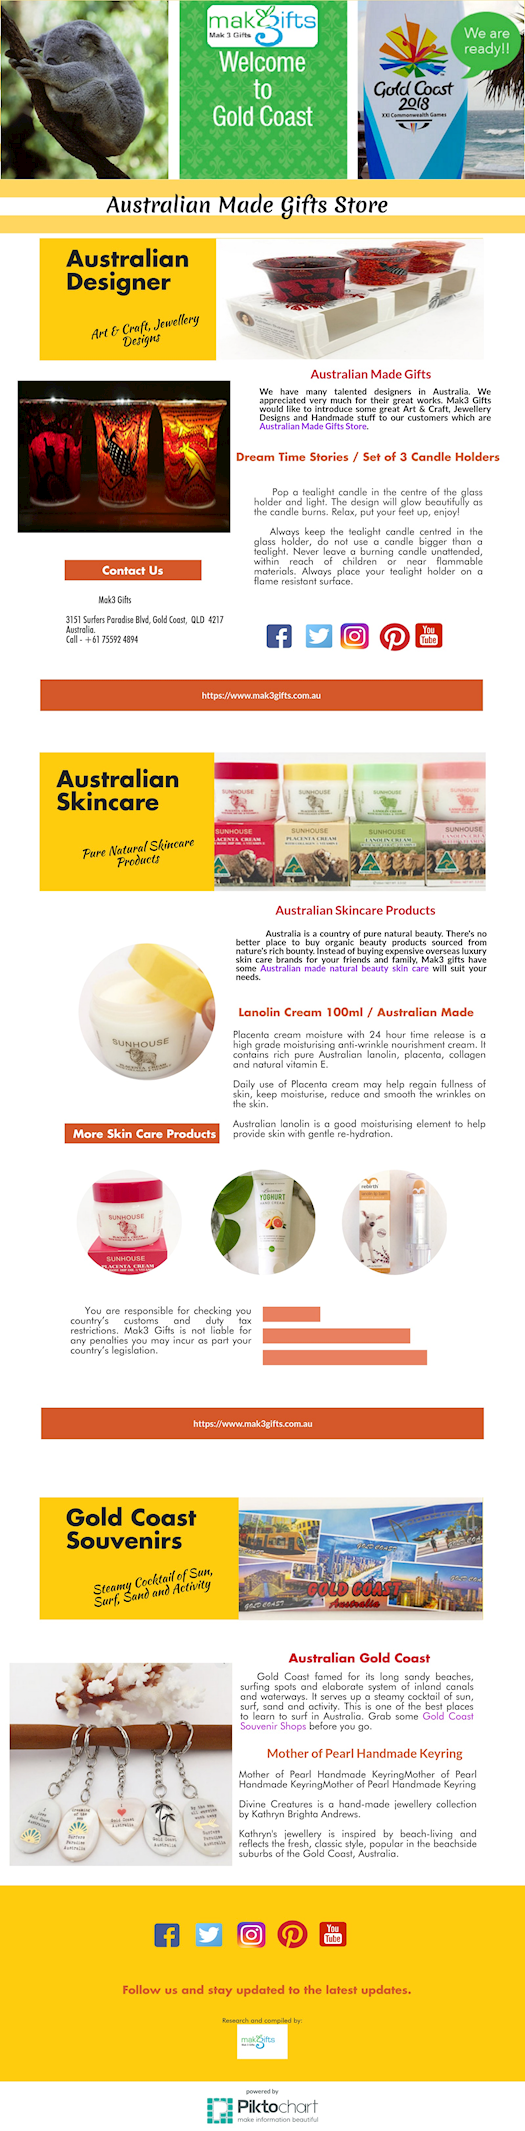 Australian Made Beauty Skin Care Products